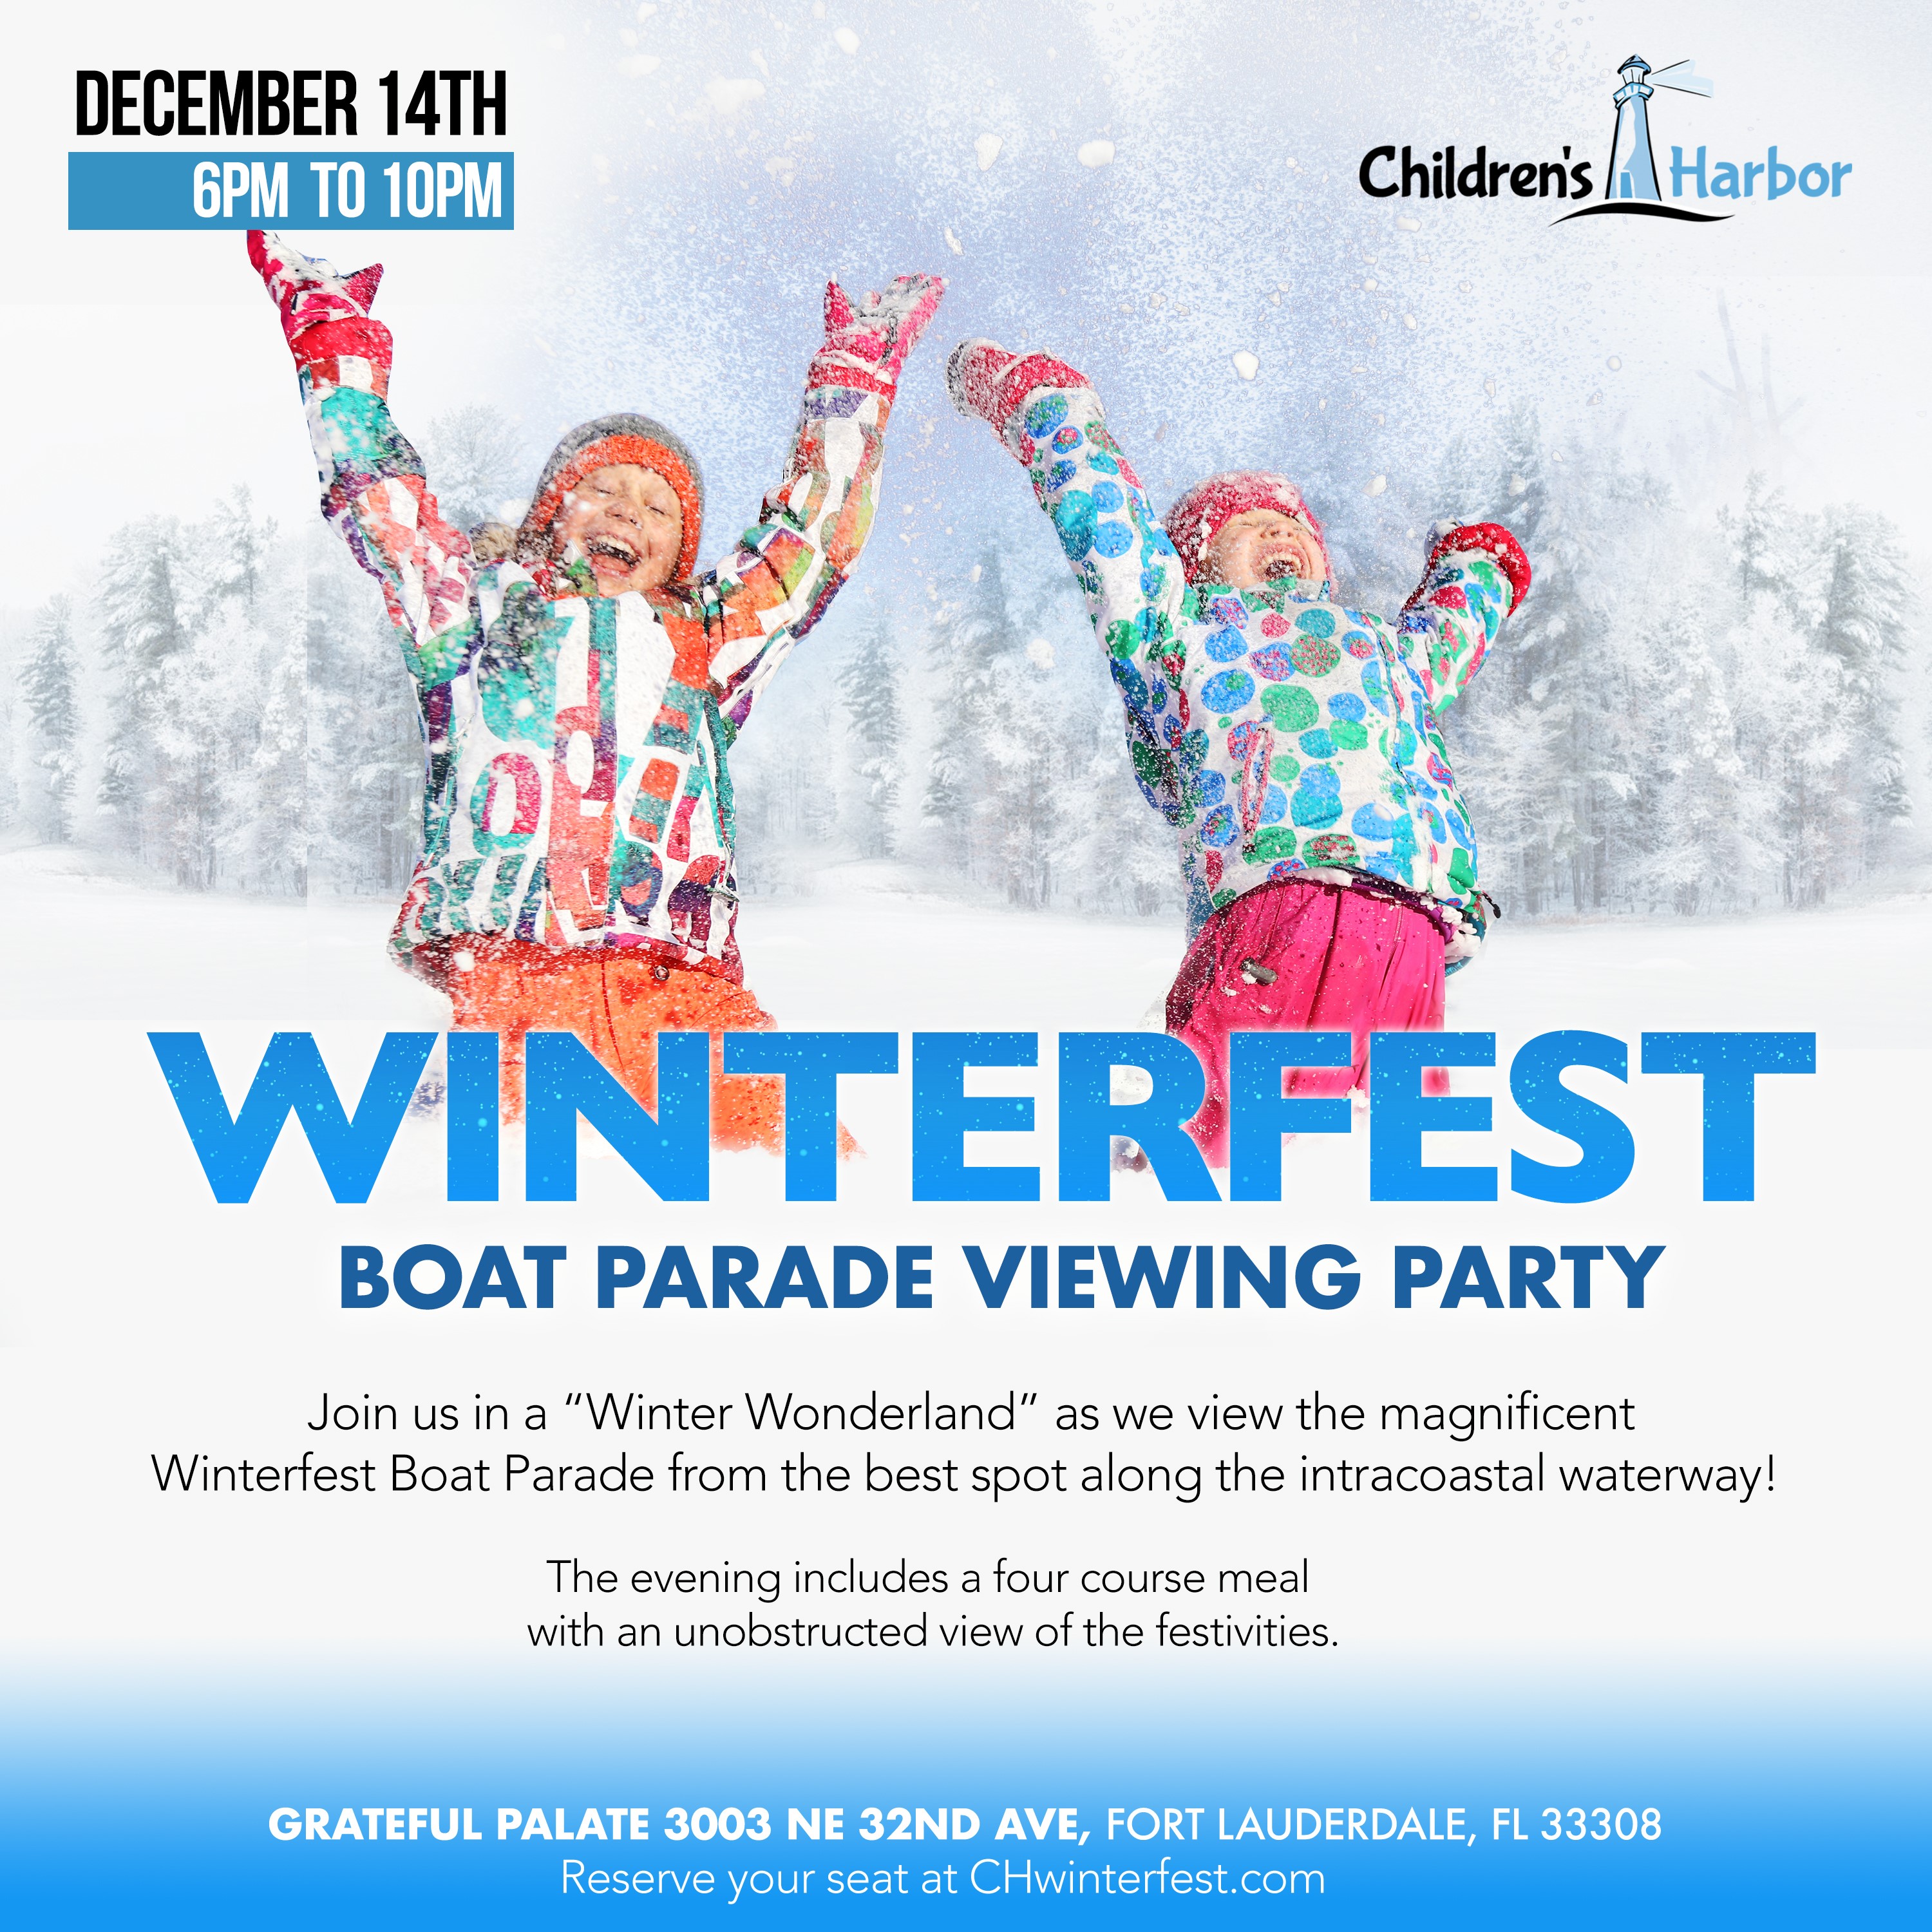 Winterfest Boat Parade Viewing Party